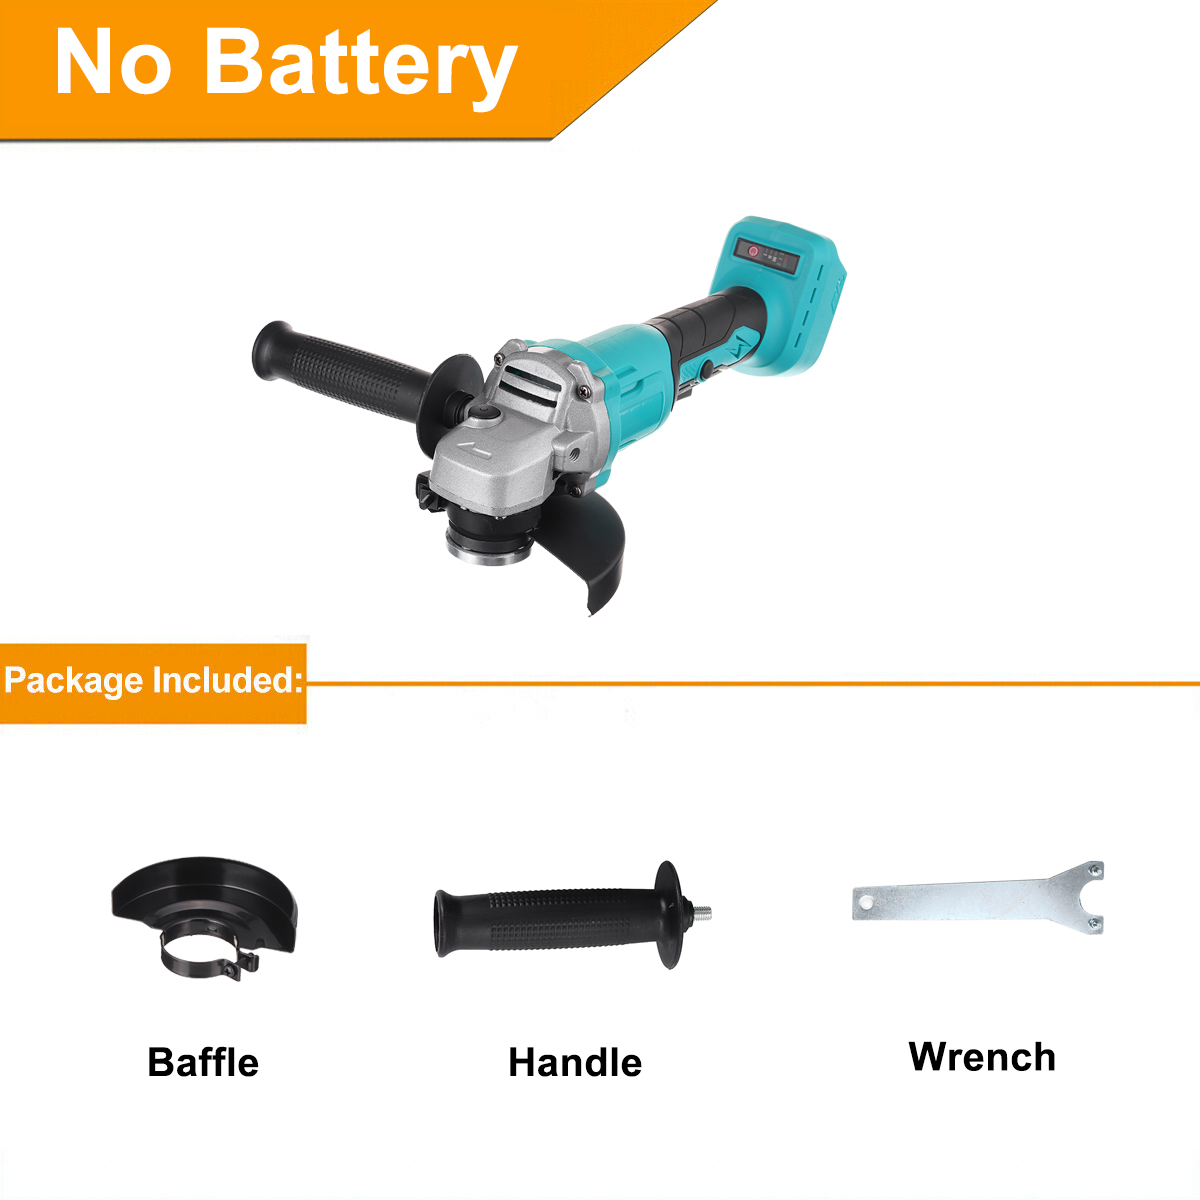 125mm18V-Cordless-Brushless-Angle-Grinder-Woodworking-Tool-For-Makita-Battery-1713408-14